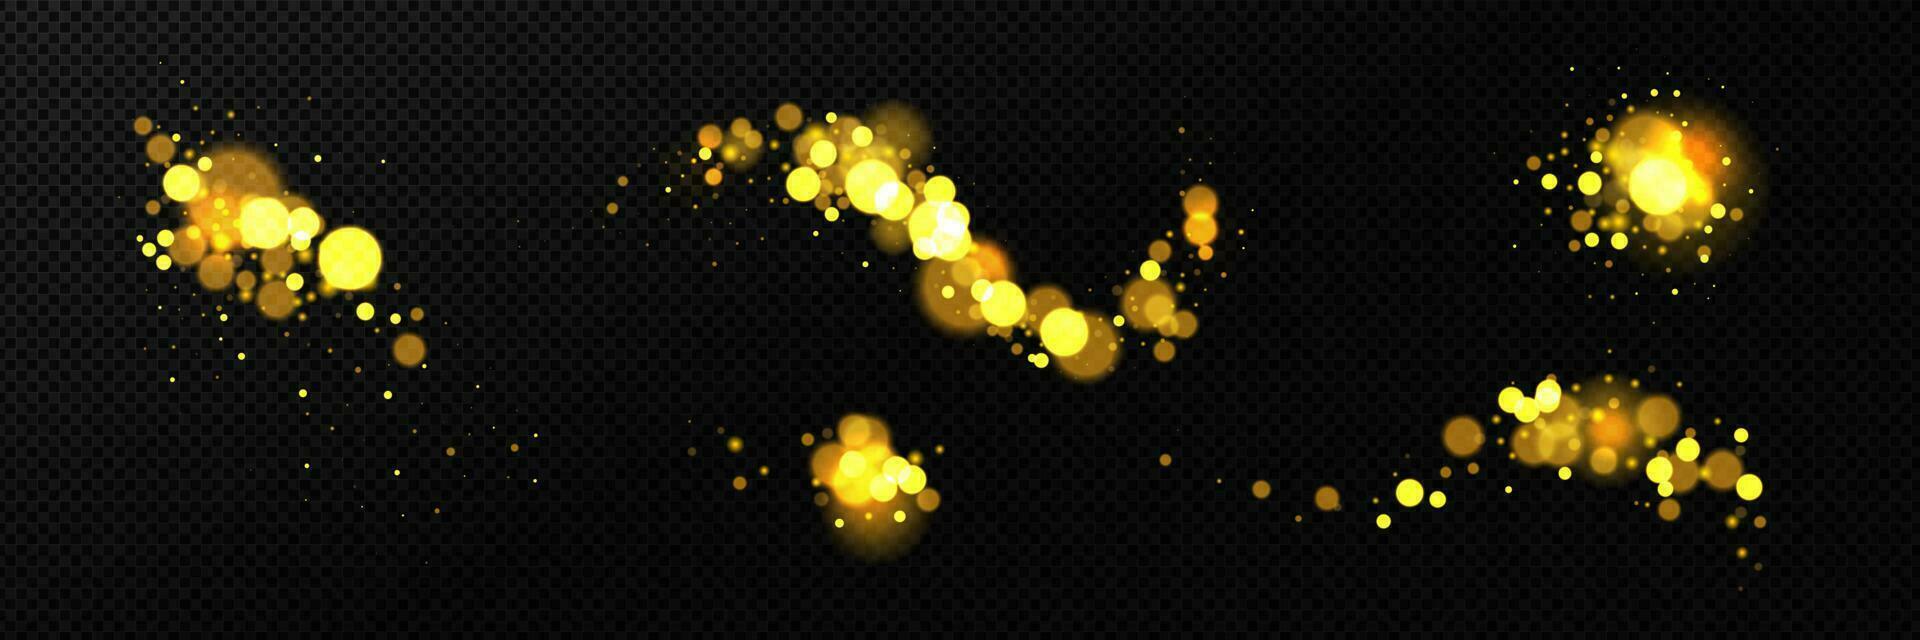 Realistic set of blurred yellow lights on black vector